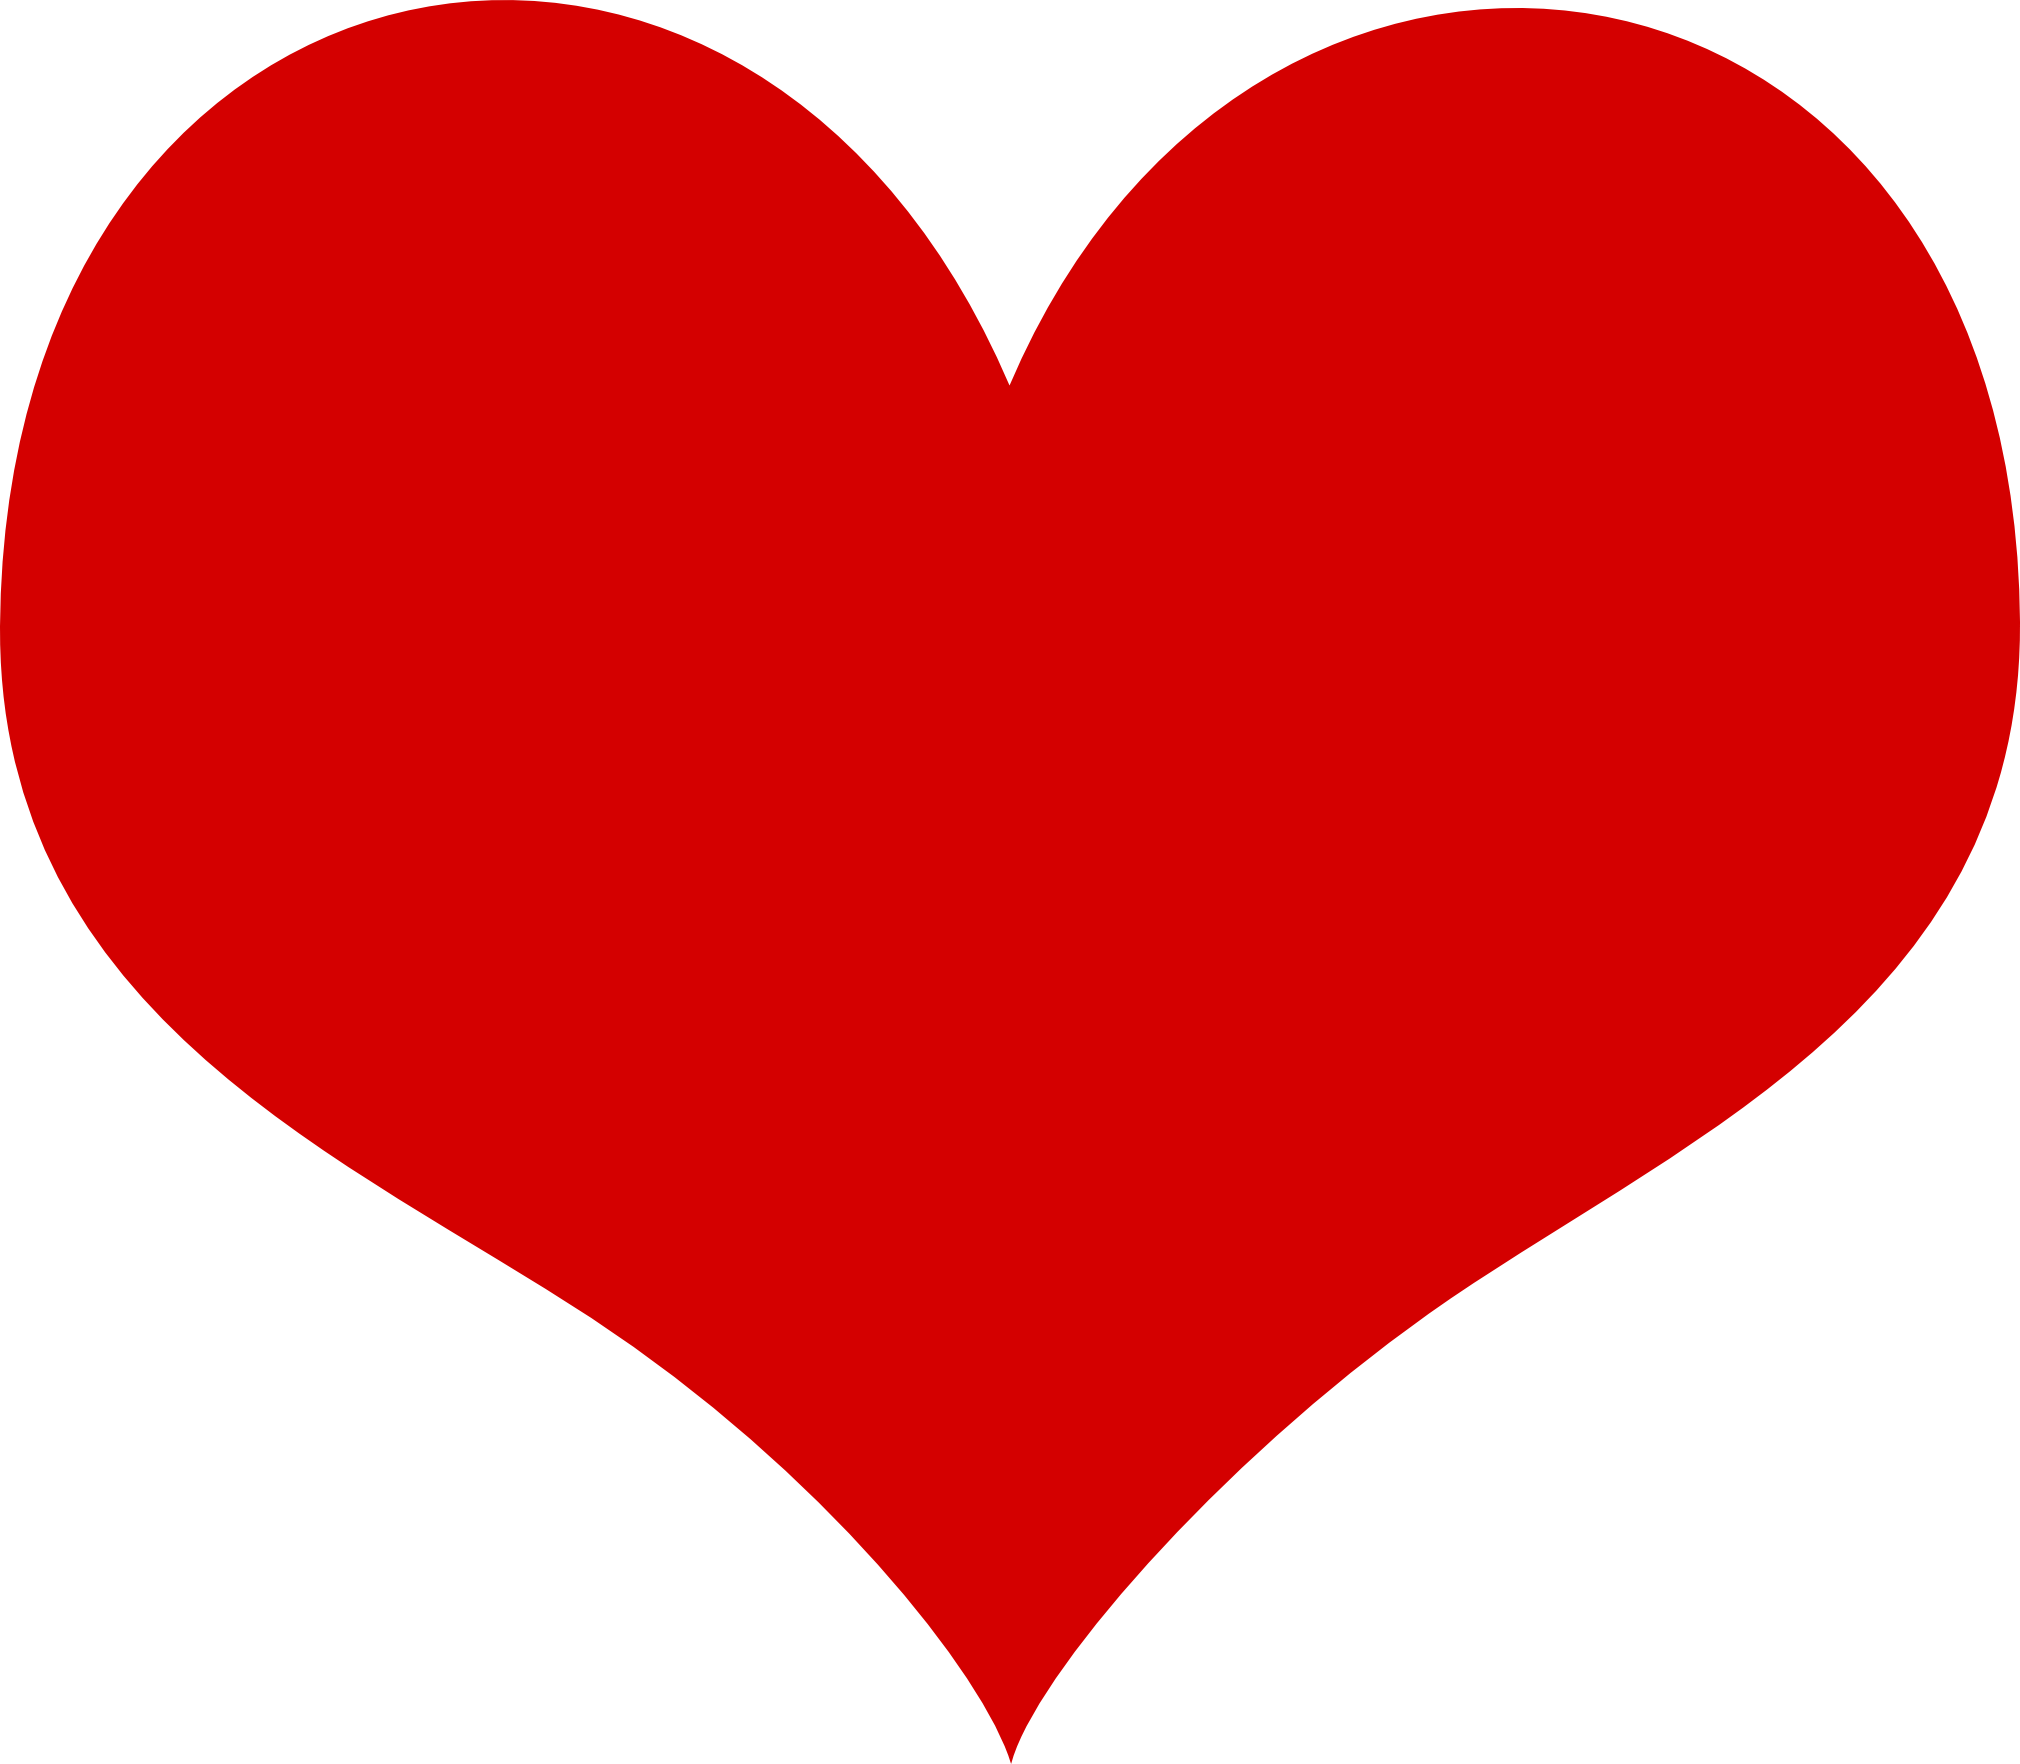 A red heart clip art image